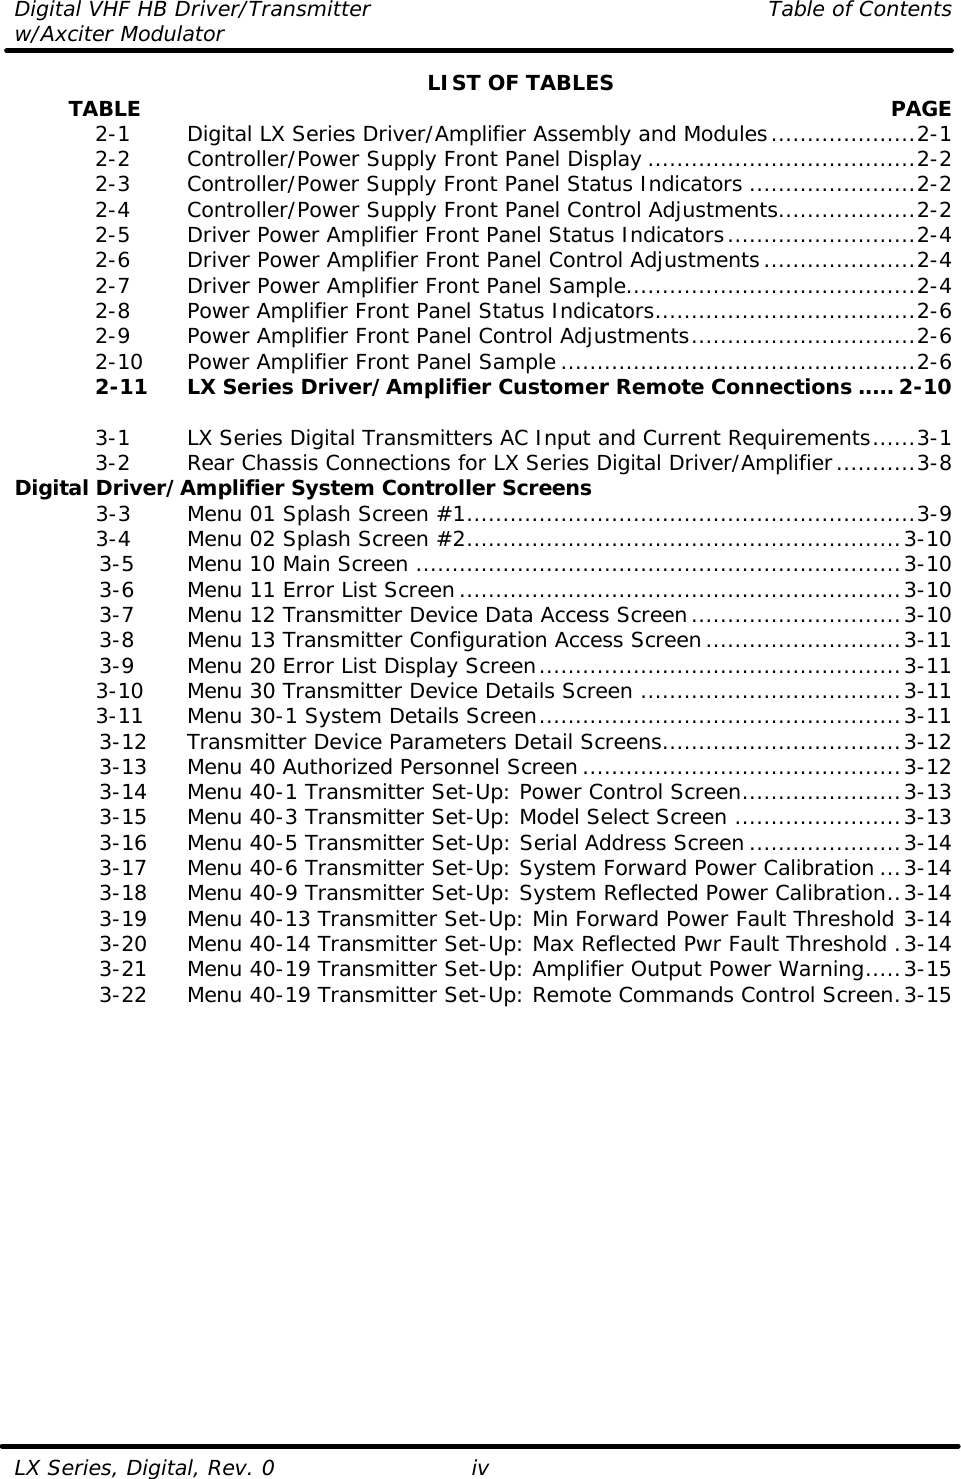 Digital VHF HB Driver/Transmitter    Table of Contents w/Axciter Modulator  LX Series, Digital, Rev. 0 iv LIST OF TABLES         TABLE  PAGE  2-1   Digital LX Series Driver/Amplifier Assembly and Modules....................2-1  2-2   Controller/Power Supply Front Panel Display .....................................2-2  2-3   Controller/Power Supply Front Panel Status Indicators .......................2-2  2-4   Controller/Power Supply Front Panel Control Adjustments...................2-2  2-5   Driver Power Amplifier Front Panel Status Indicators..........................2-4  2-6   Driver Power Amplifier Front Panel Control Adjustments.....................2-4  2-7   Driver Power Amplifier Front Panel Sample........................................2-4  2-8   Power Amplifier Front Panel Status Indicators....................................2-6  2-9   Power Amplifier Front Panel Control Adjustments...............................2-6  2-10 Power Amplifier Front Panel Sample.................................................2-6  2-11 LX Series Driver/Amplifier Customer Remote Connections ..... 2-10   3-1   LX Series Digital Transmitters AC Input and Current Requirements......3-1  3-2   Rear Chassis Connections for LX Series Digital Driver/Amplifier...........3-8 Digital Driver/Amplifier System Controller Screens     3-3   Menu 01 Splash Screen #1..............................................................3-9     3-4   Menu 02 Splash Screen #2............................................................3-10     3-5   Menu 10 Main Screen ...................................................................3-10     3-6   Menu 11 Error List Screen.............................................................3-10     3-7   Menu 12 Transmitter Device Data Access Screen.............................3-10     3-8   Menu 13 Transmitter Configuration Access Screen...........................3-11     3-9   Menu 20 Error List Display Screen..................................................3-11     3-10 Menu 30 Transmitter Device Details Screen ....................................3-11     3-11 Menu 30-1 System Details Screen..................................................3-11     3-12 Transmitter Device Parameters Detail Screens.................................3-12     3-13 Menu 40 Authorized Personnel Screen............................................3-12     3-14 Menu 40-1 Transmitter Set-Up: Power Control Screen......................3-13     3-15 Menu 40-3 Transmitter Set-Up: Model Select Screen .......................3-13     3-16 Menu 40-5 Transmitter Set-Up: Serial Address Screen.....................3-14     3-17 Menu 40-6 Transmitter Set-Up: System Forward Power Calibration ...3-14     3-18 Menu 40-9 Transmitter Set-Up: System Reflected Power Calibration..3-14     3-19 Menu 40-13 Transmitter Set-Up: Min Forward Power Fault Threshold 3-14     3-20 Menu 40-14 Transmitter Set-Up: Max Reflected Pwr Fault Threshold .3-14     3-21 Menu 40-19 Transmitter Set-Up: Amplifier Output Power Warning.....3-15     3-22 Menu 40-19 Transmitter Set-Up: Remote Commands Control Screen.3-15 